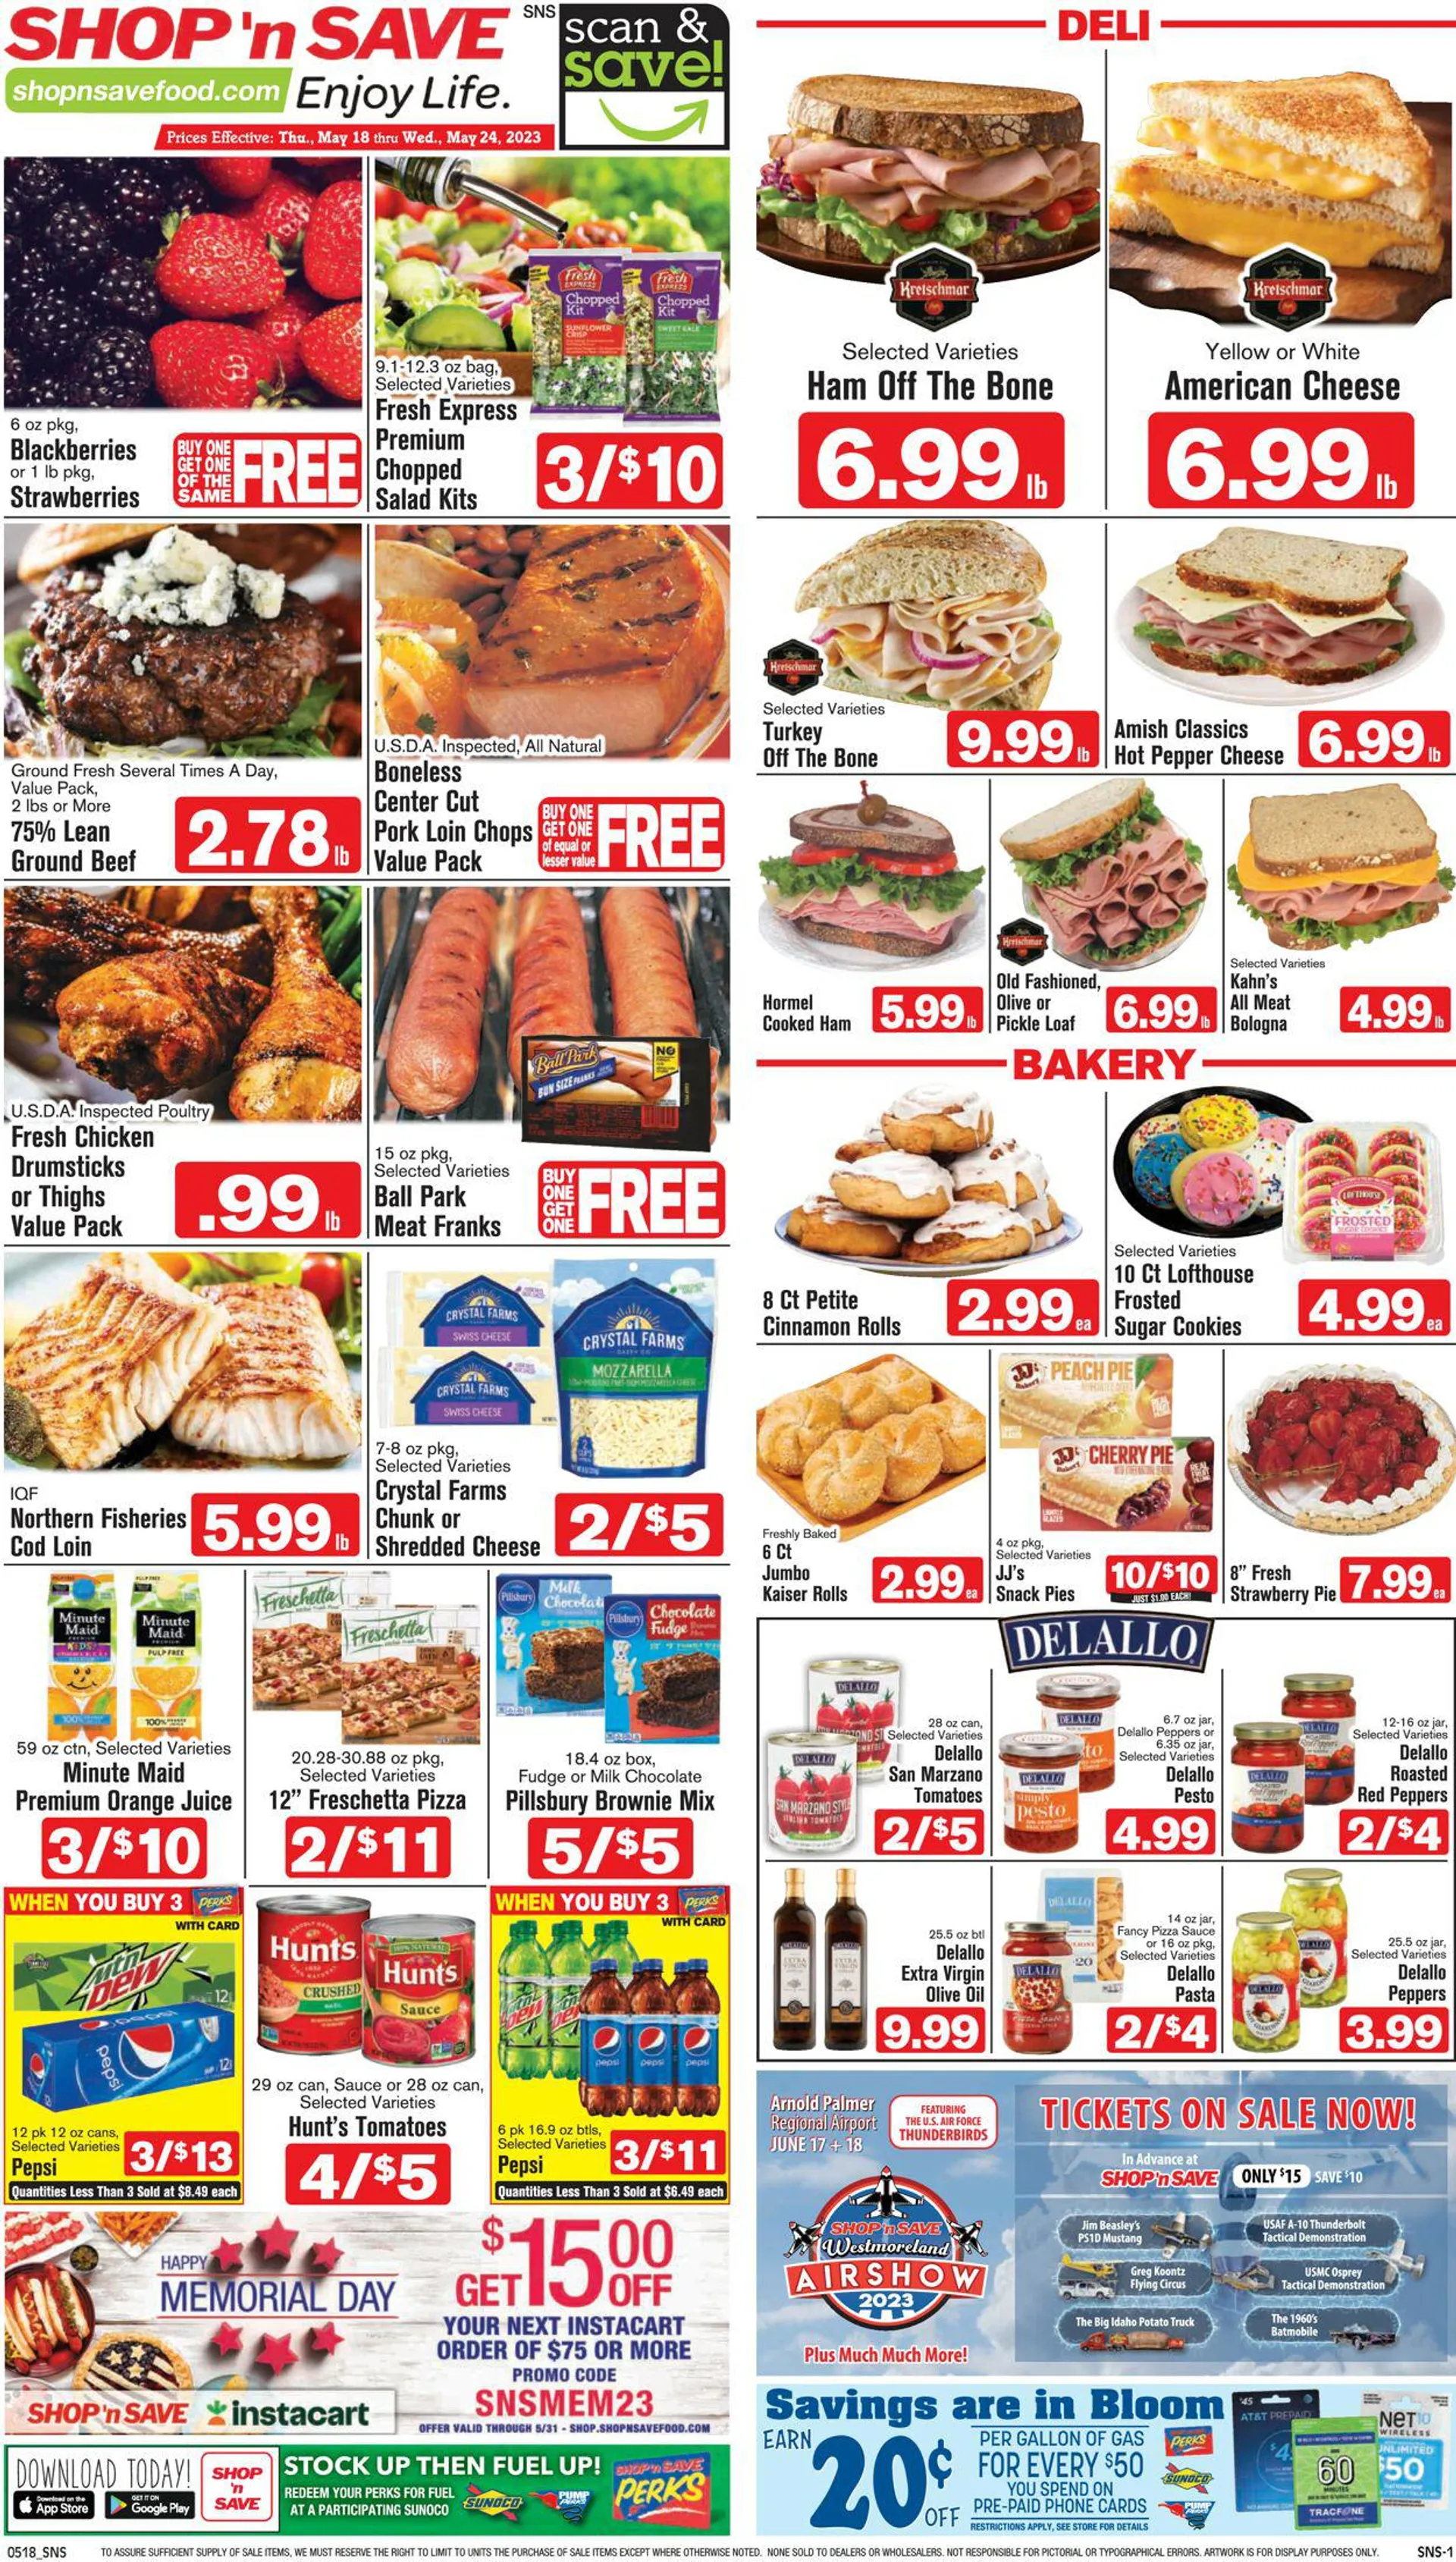 Shop ‘n Save Current weekly ad - 1